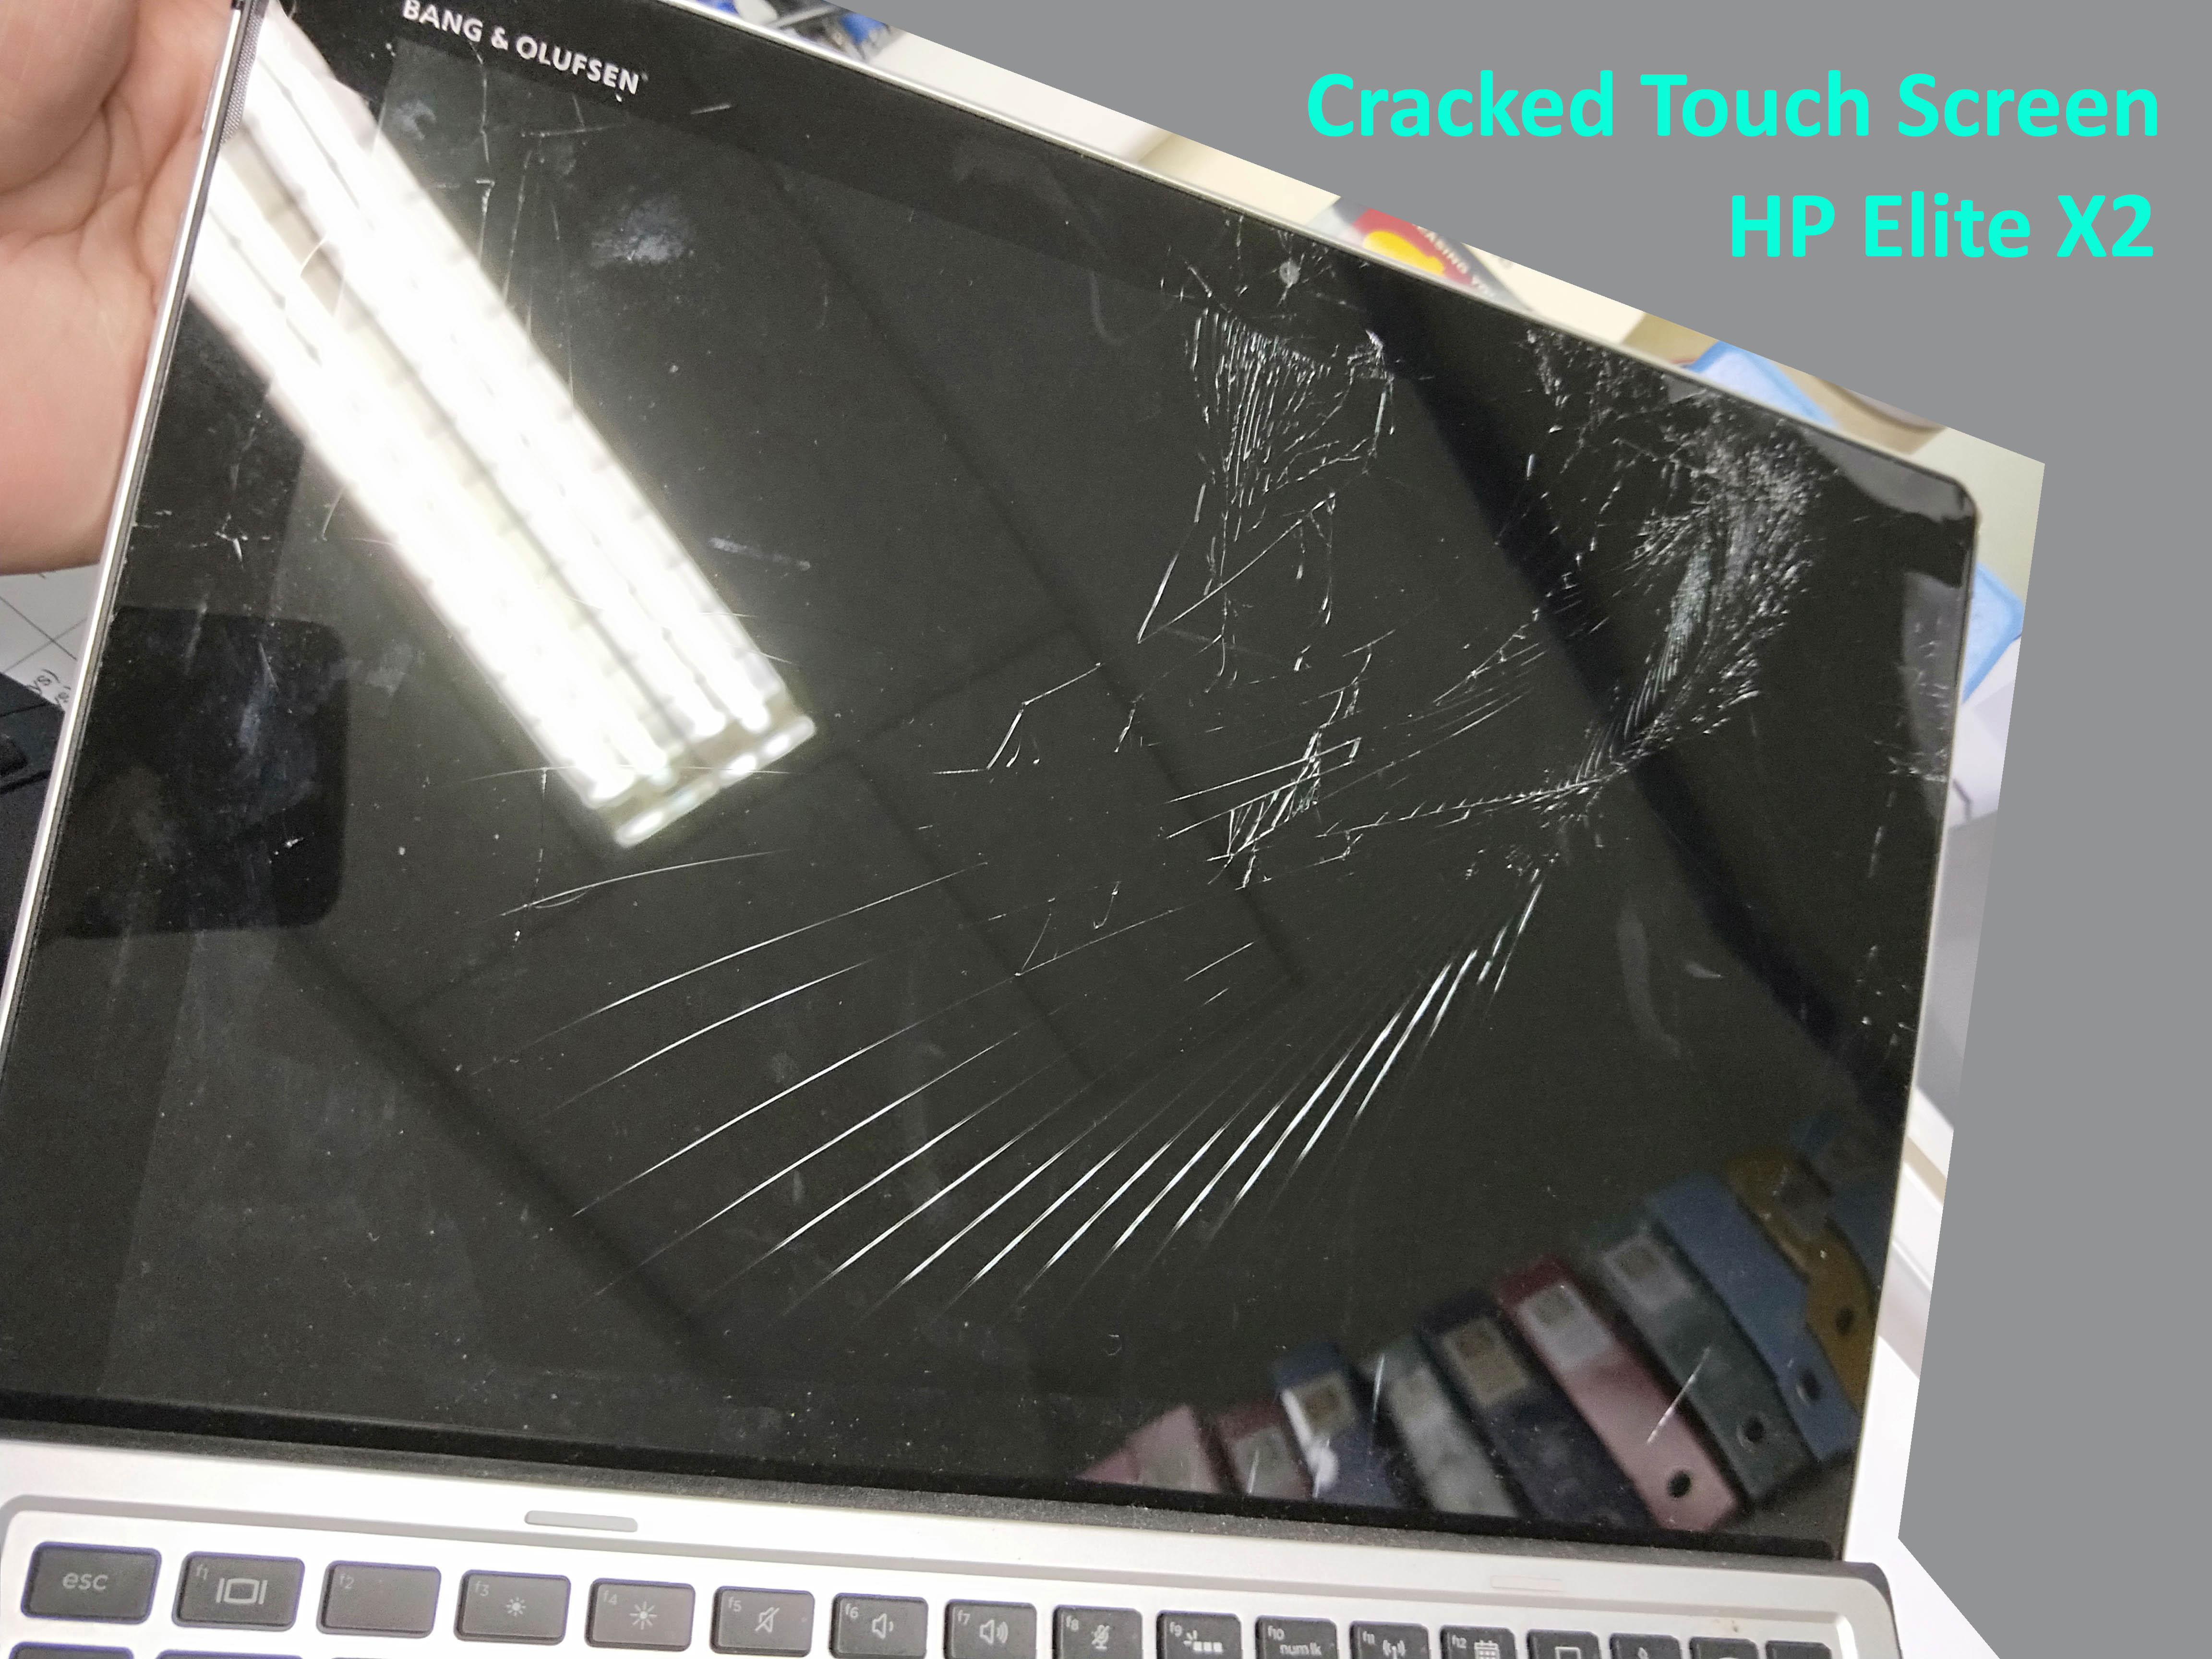 HP Elite X2 Cracked Touch Screen